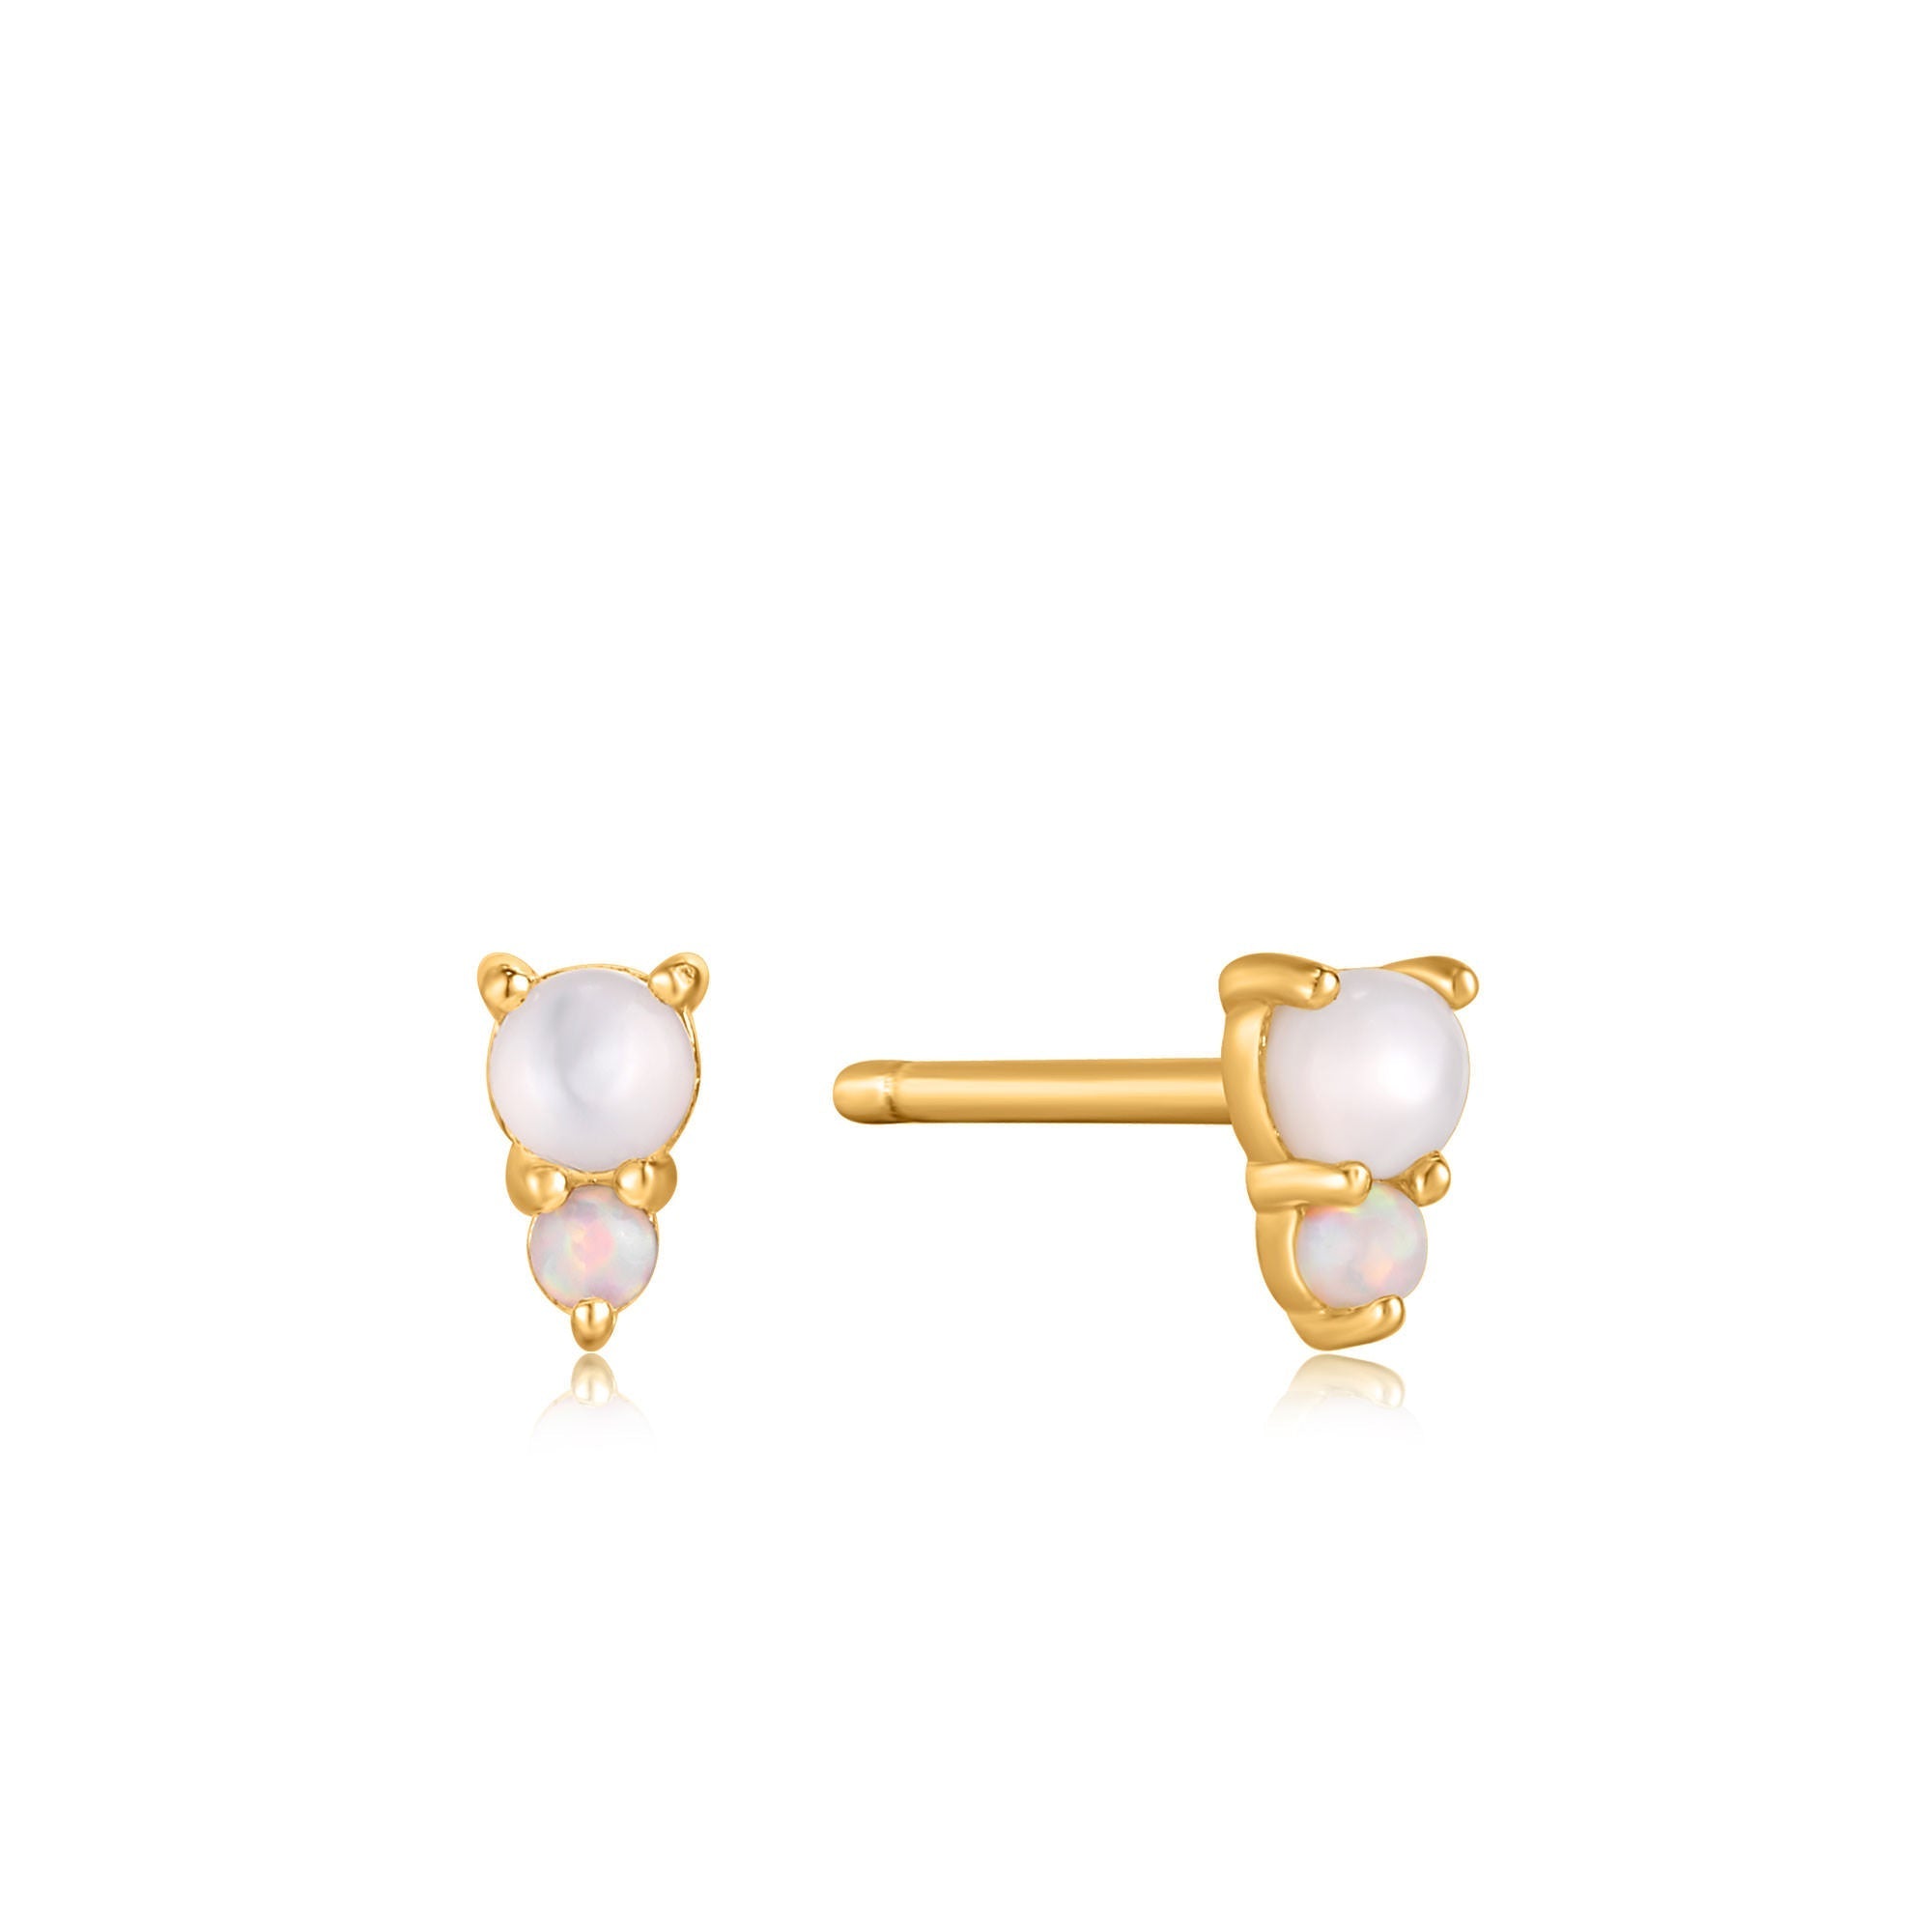 Ania Haie Mother of Pearl and Kyoto Opal Stud Earrings